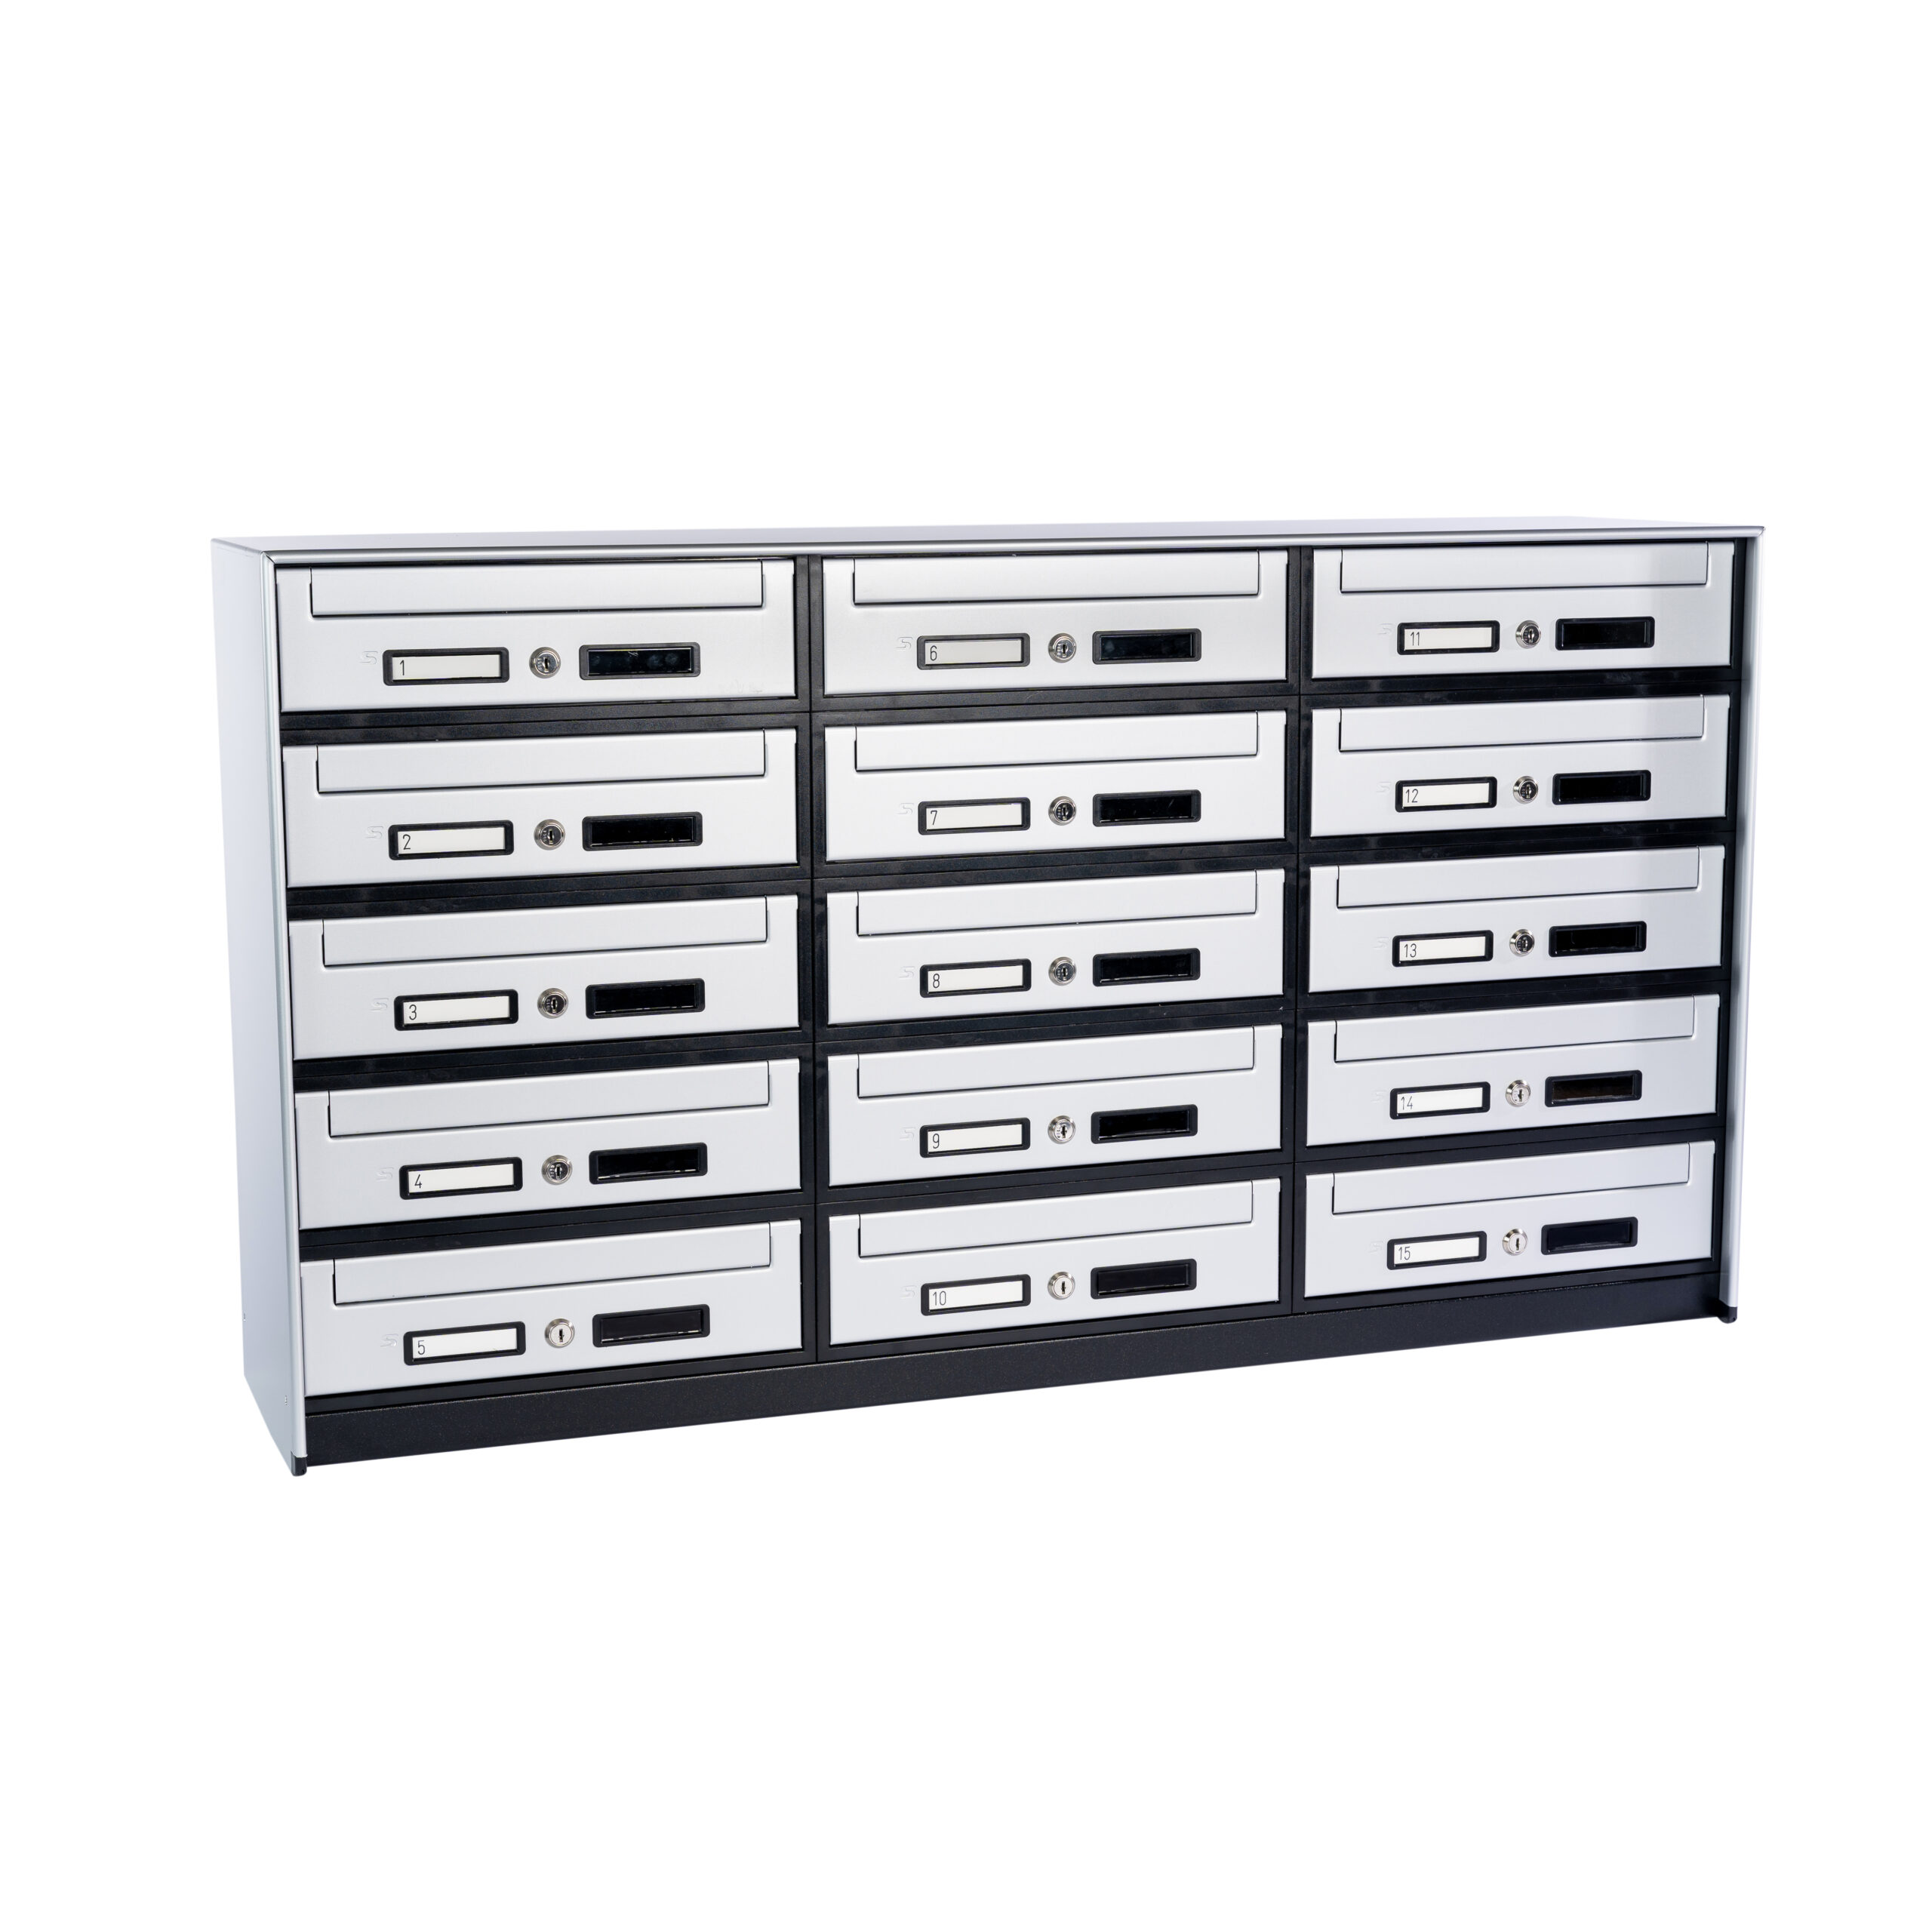 SC5 standard modular letterbox units with front mail collection - 15 mailboxes